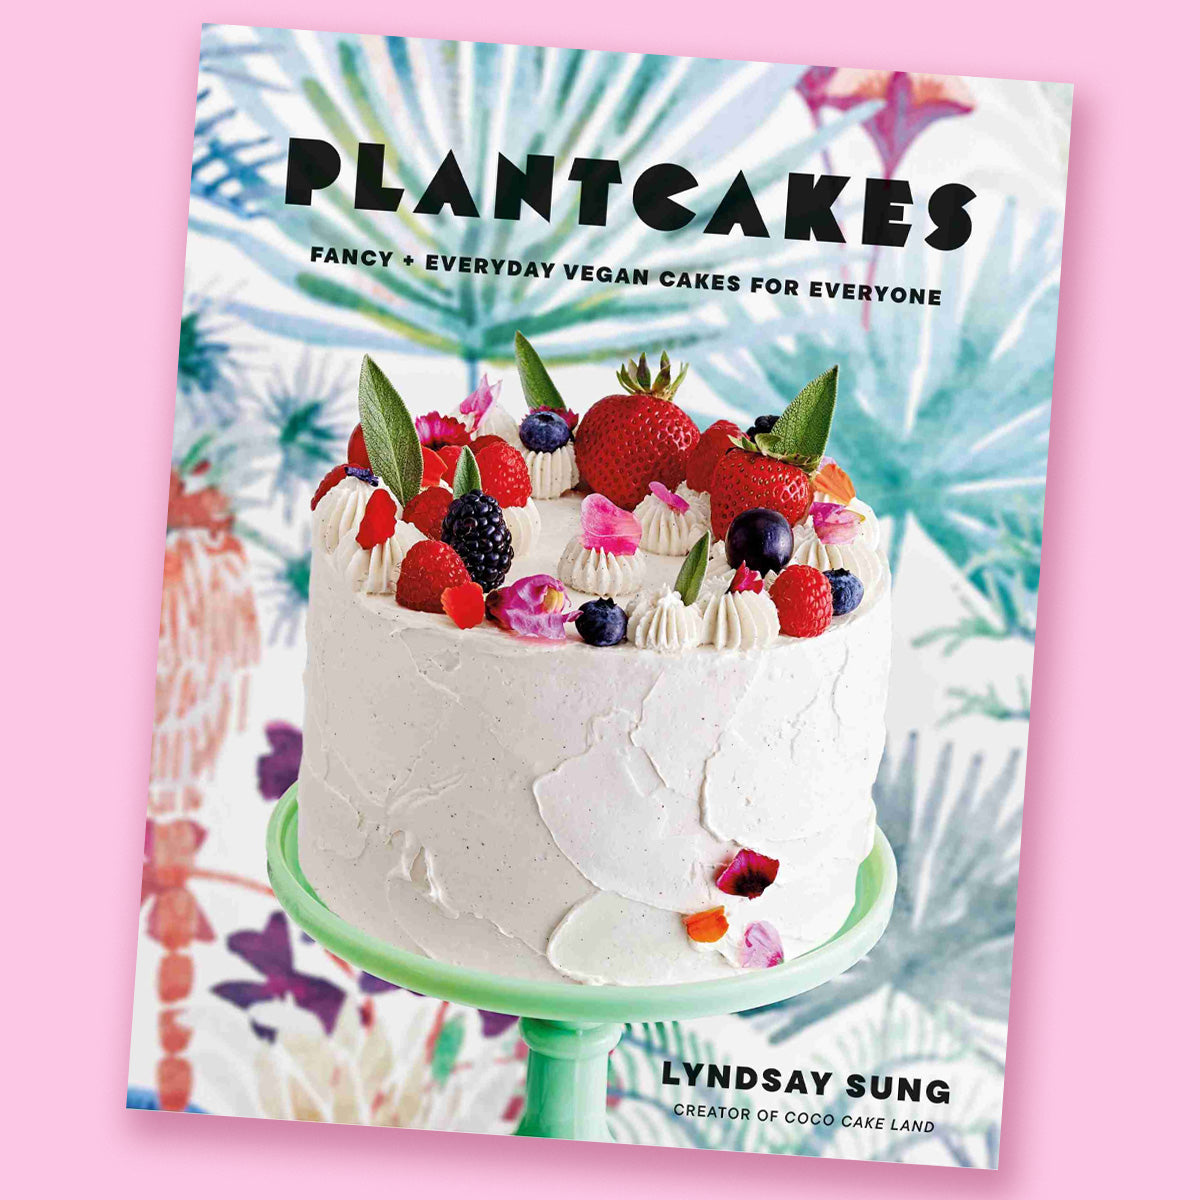 Plantcakes: Fancy + Everyday Vegan Cakes for Everyone by Lyndsay Sung